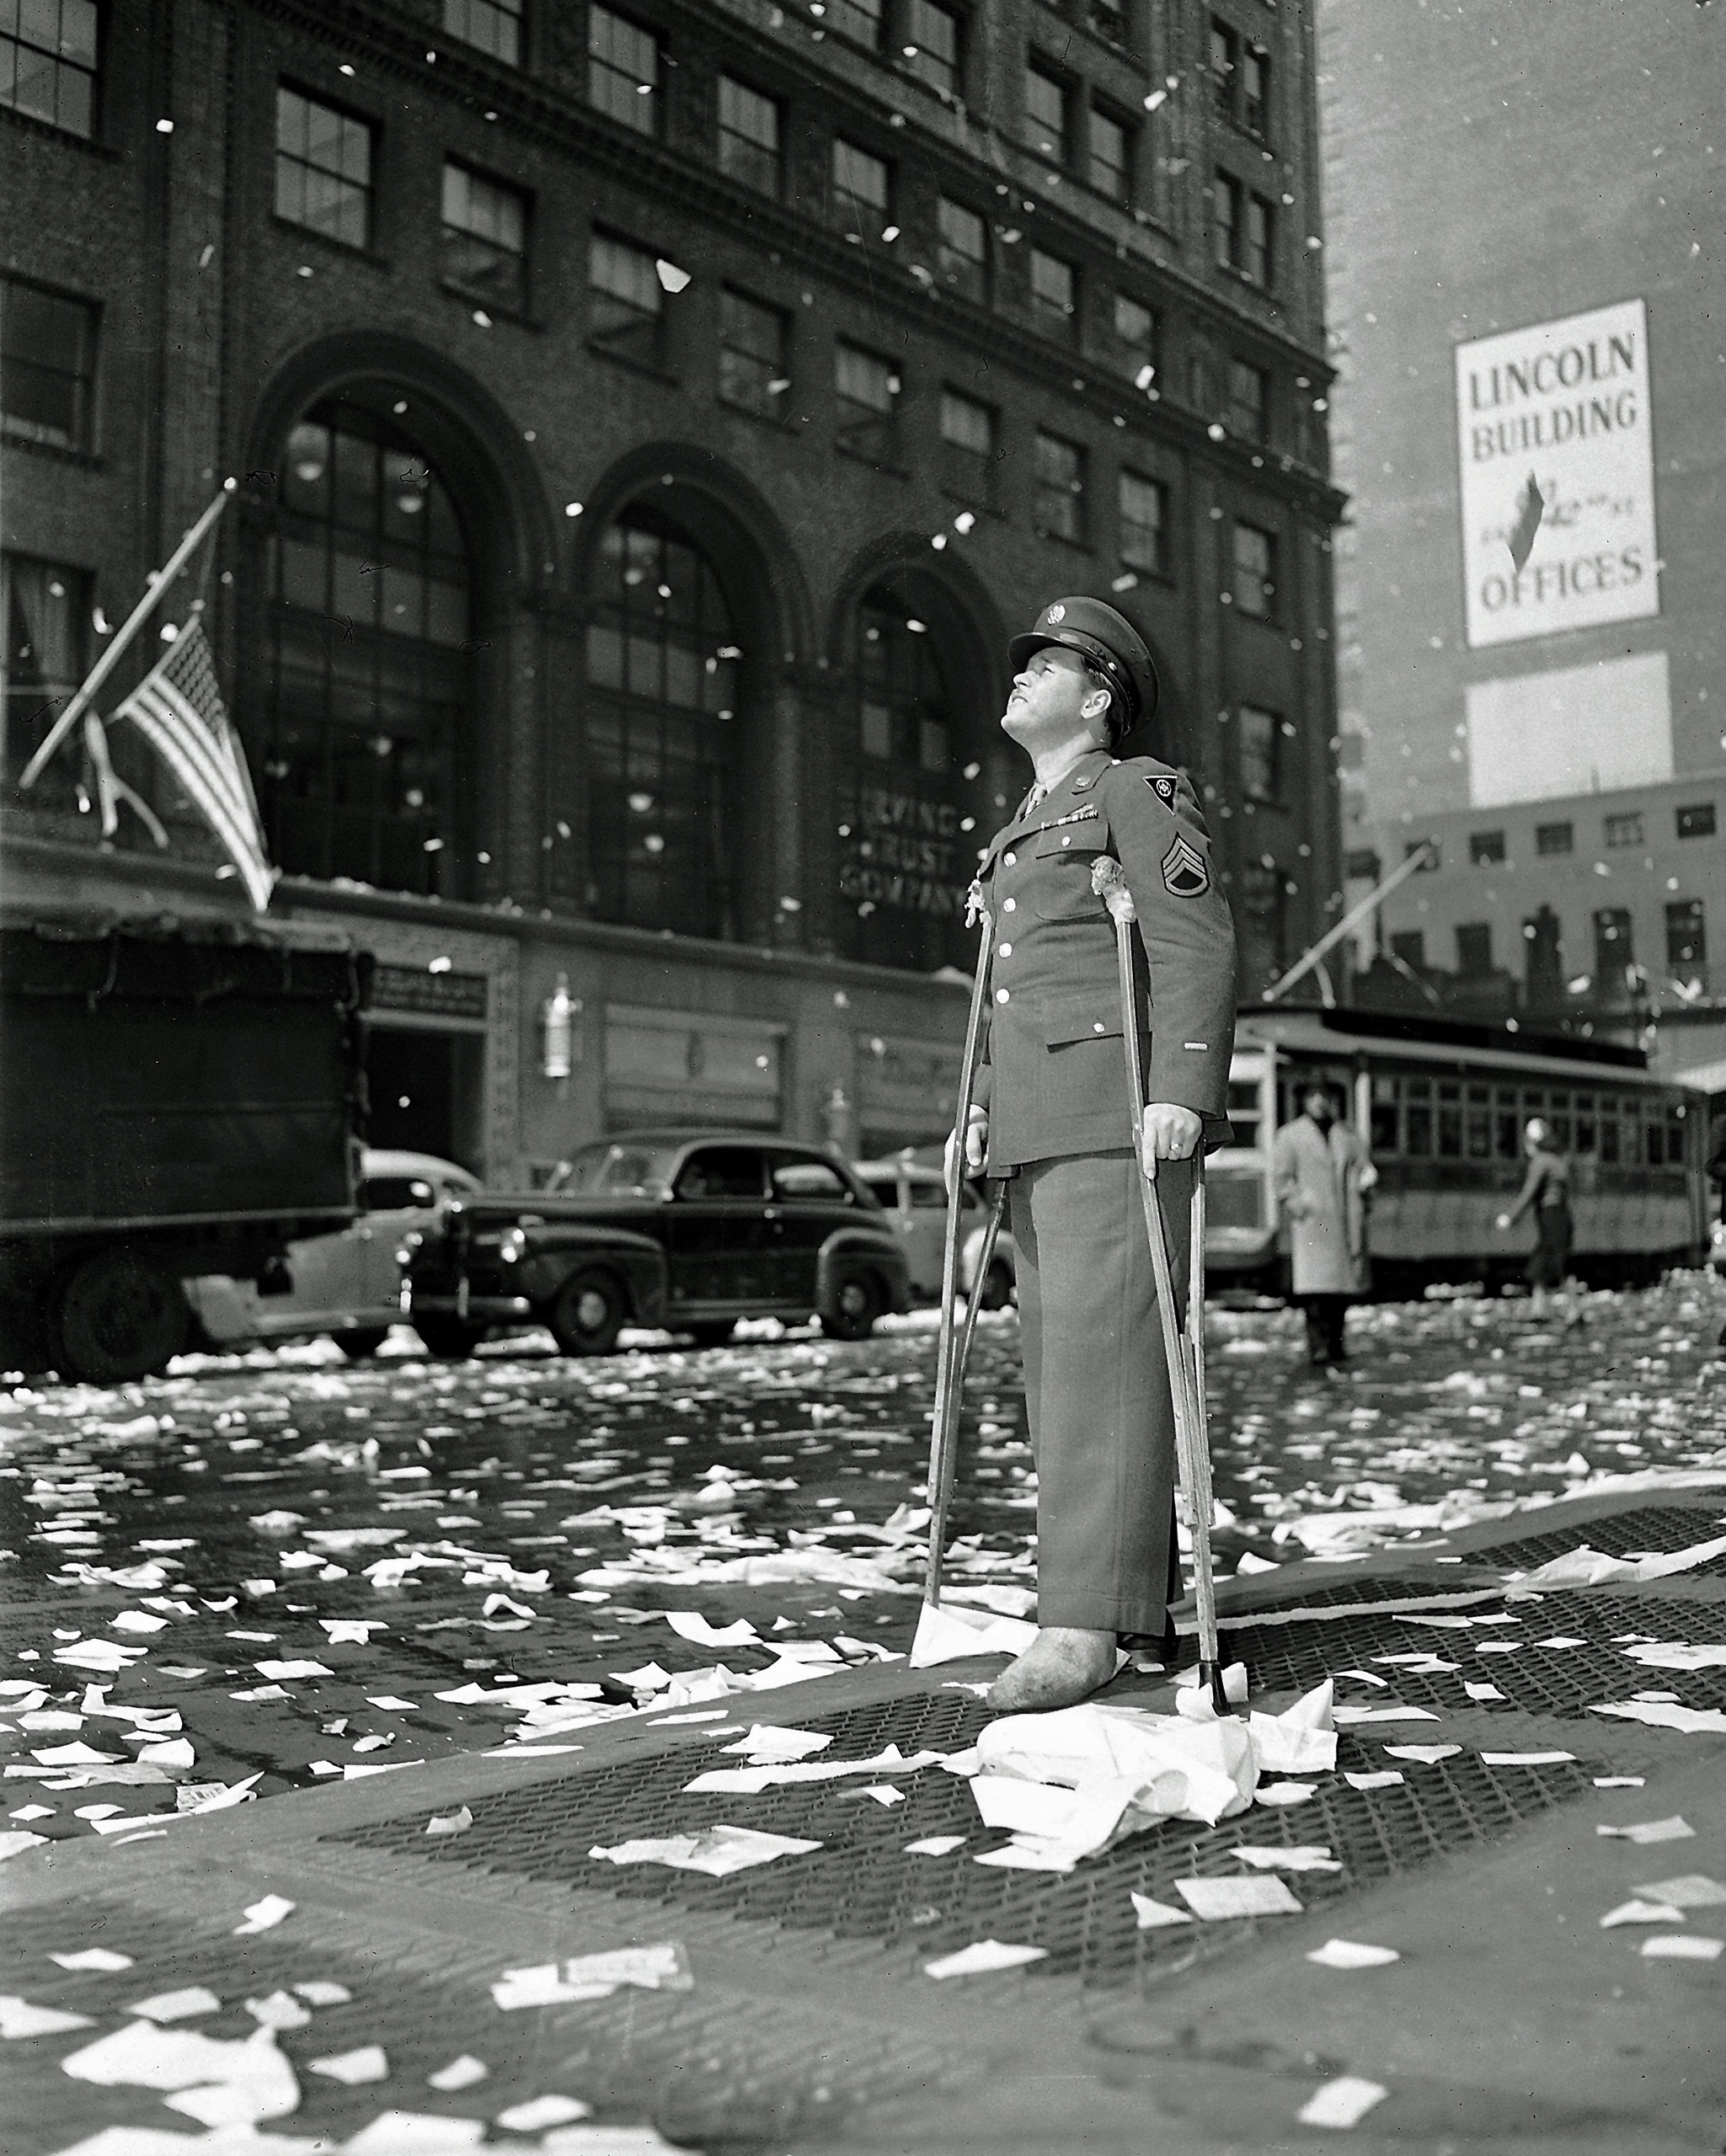 Staff Sgt. Arthur Moore of Buffalo, N.Y., who was wounded in Belgium, stands on 42nd Street near Grand Central Station in New York Monday, May 7, 1945 as New Yorkers celebrate news of VE Day, victory over Nazi Germany.